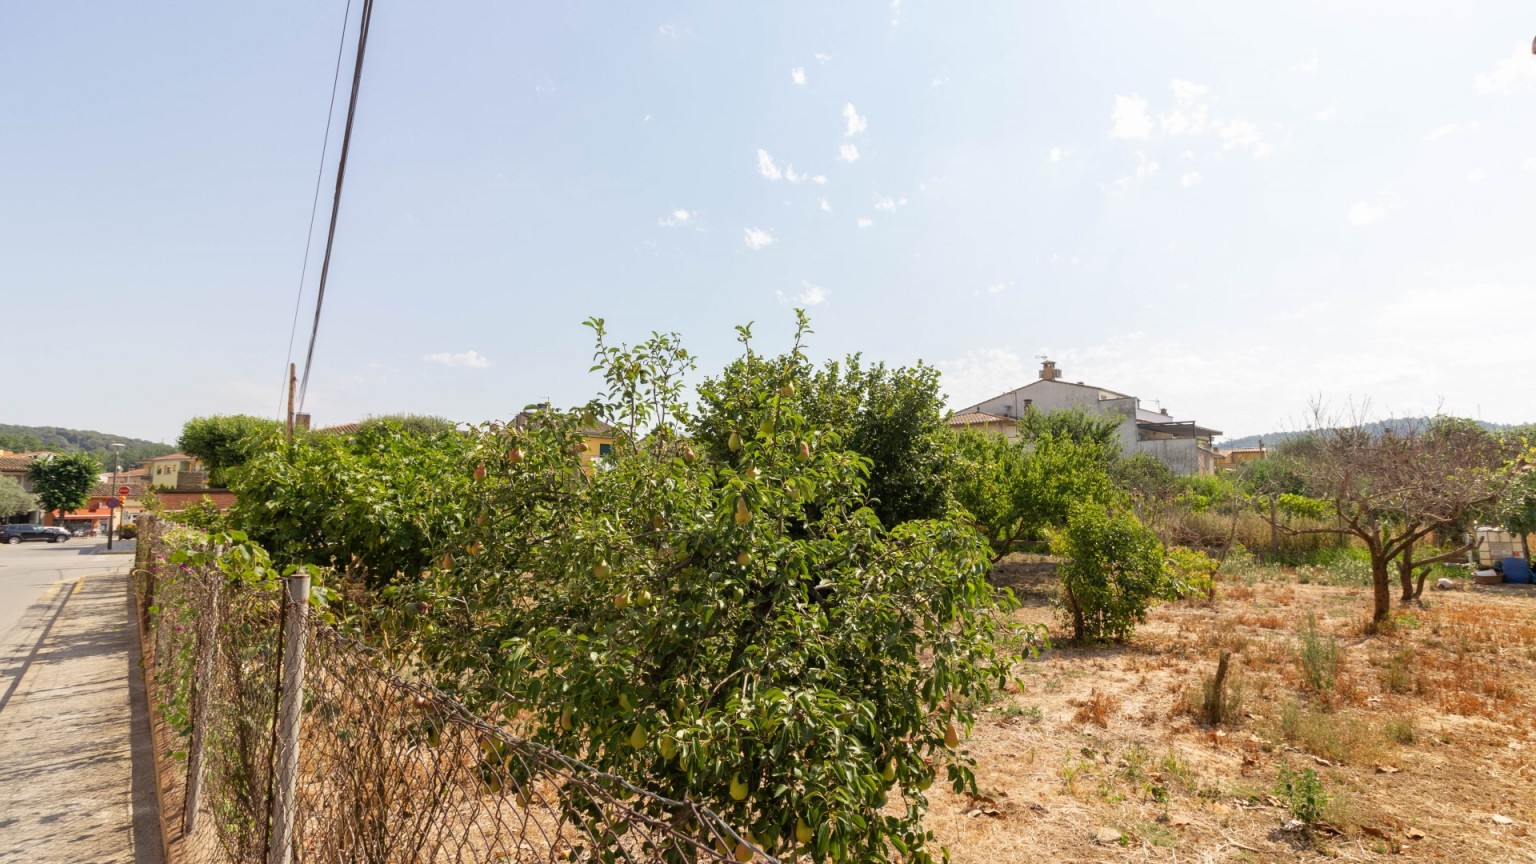 Building lot for sale, located in Bescanó.